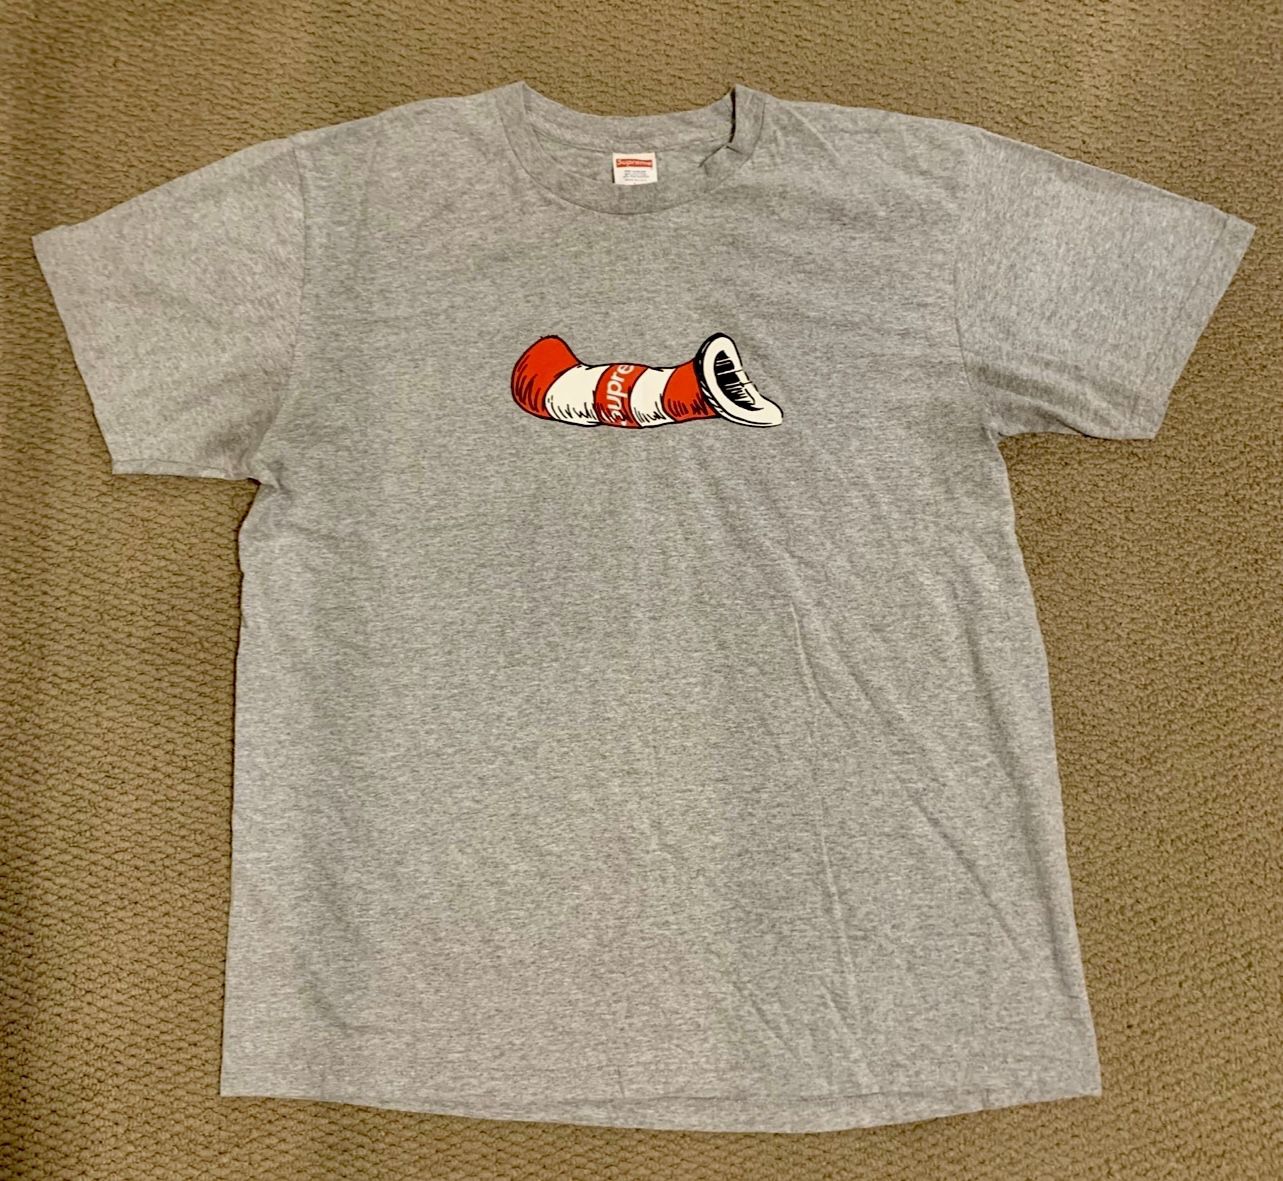 Supreme “cat in the hat” tee